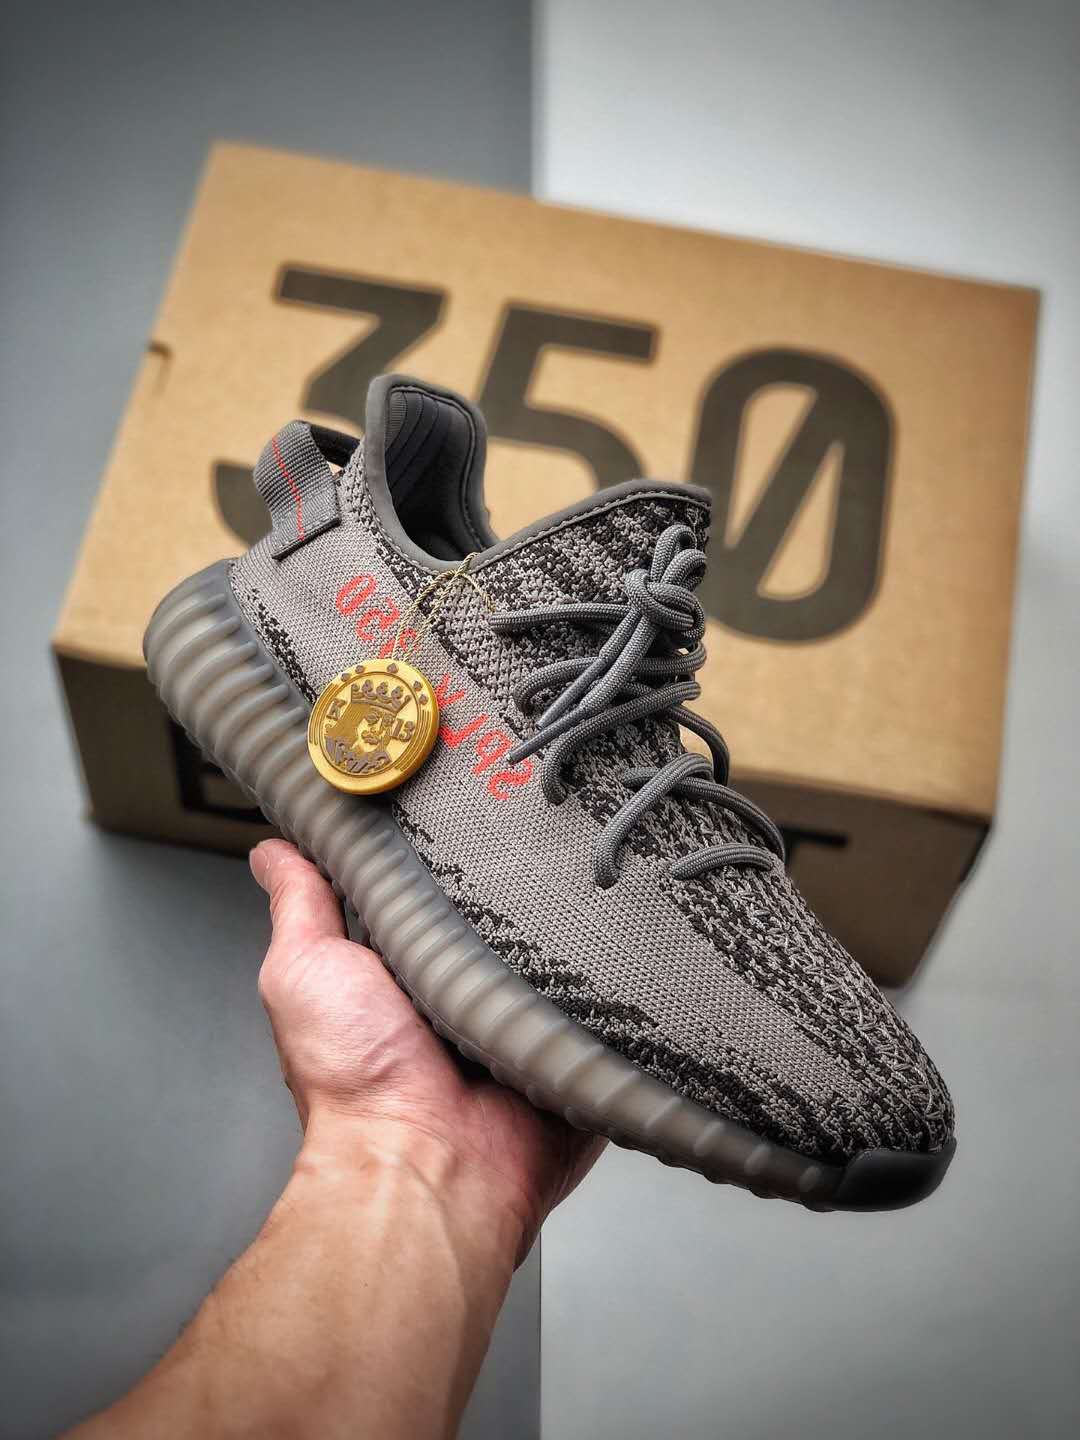 Adidas Yeezy Boost 350 V2 'Beluga 2.0' - High Performance and Style in One!